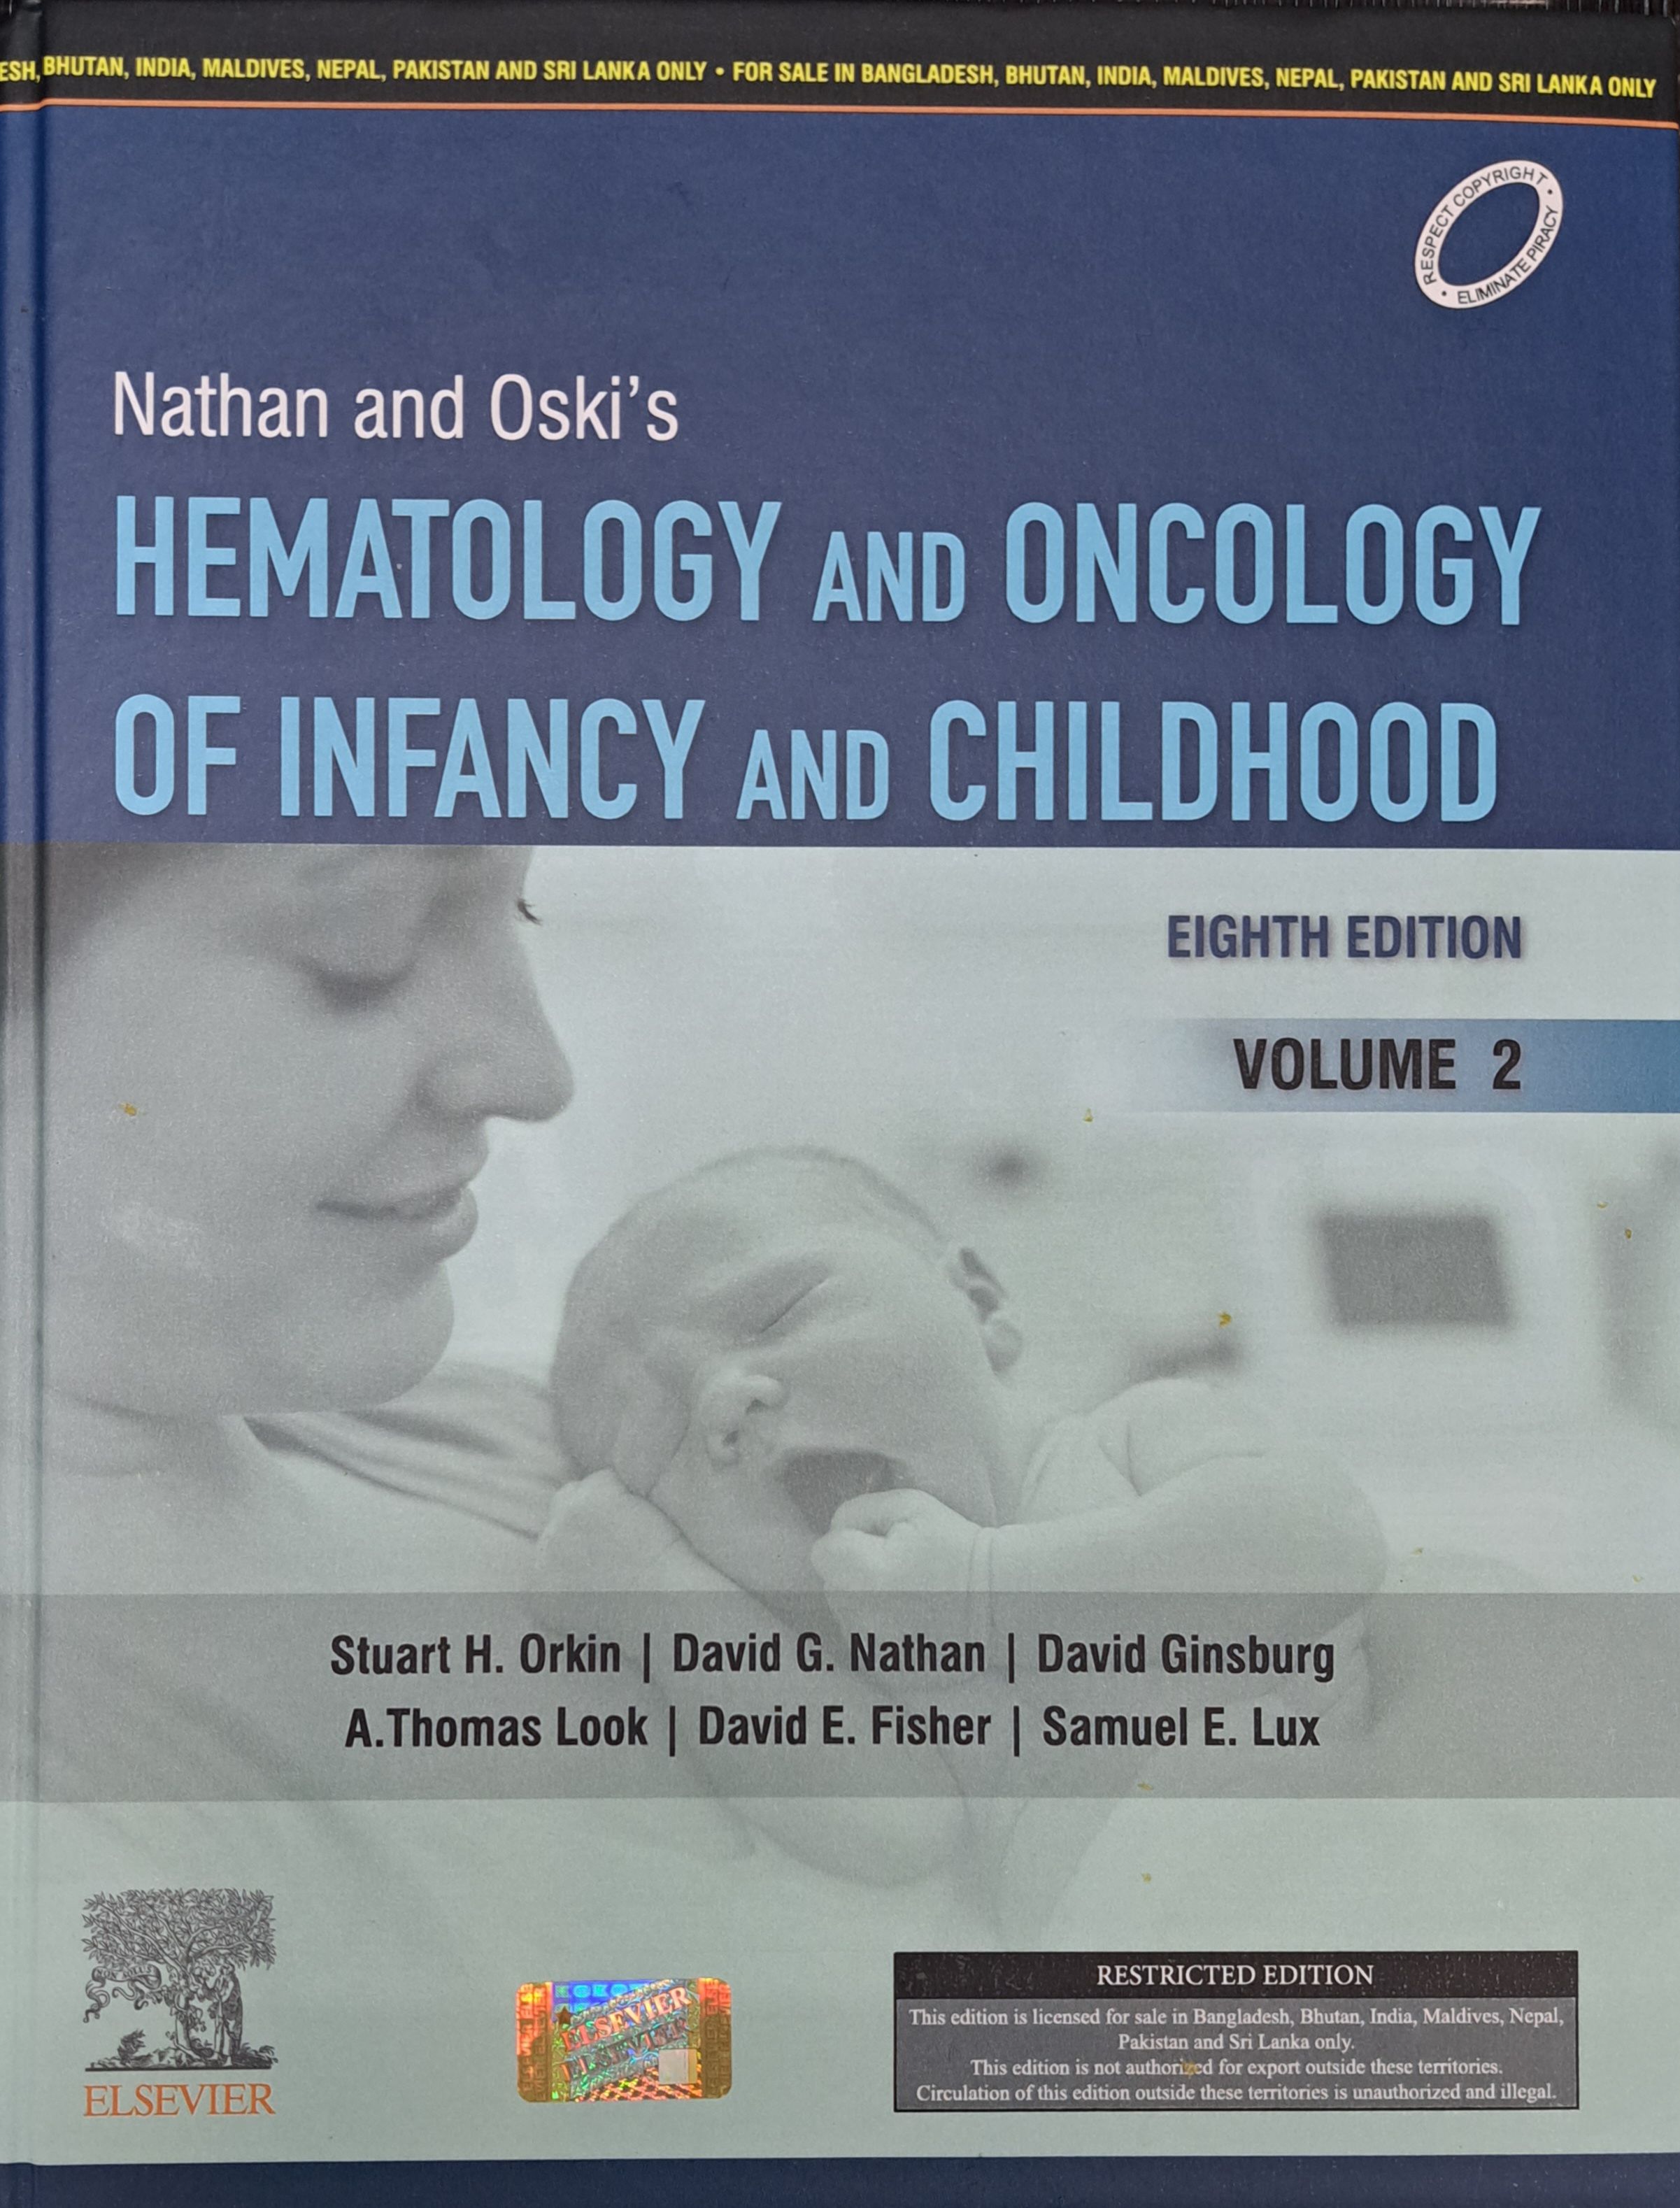 

exclusive-publishers/elsevier/nathan-and-oski-s-hematology-and-oncology-of-infancy-and-childhood:-2-volume-set-9788131264676